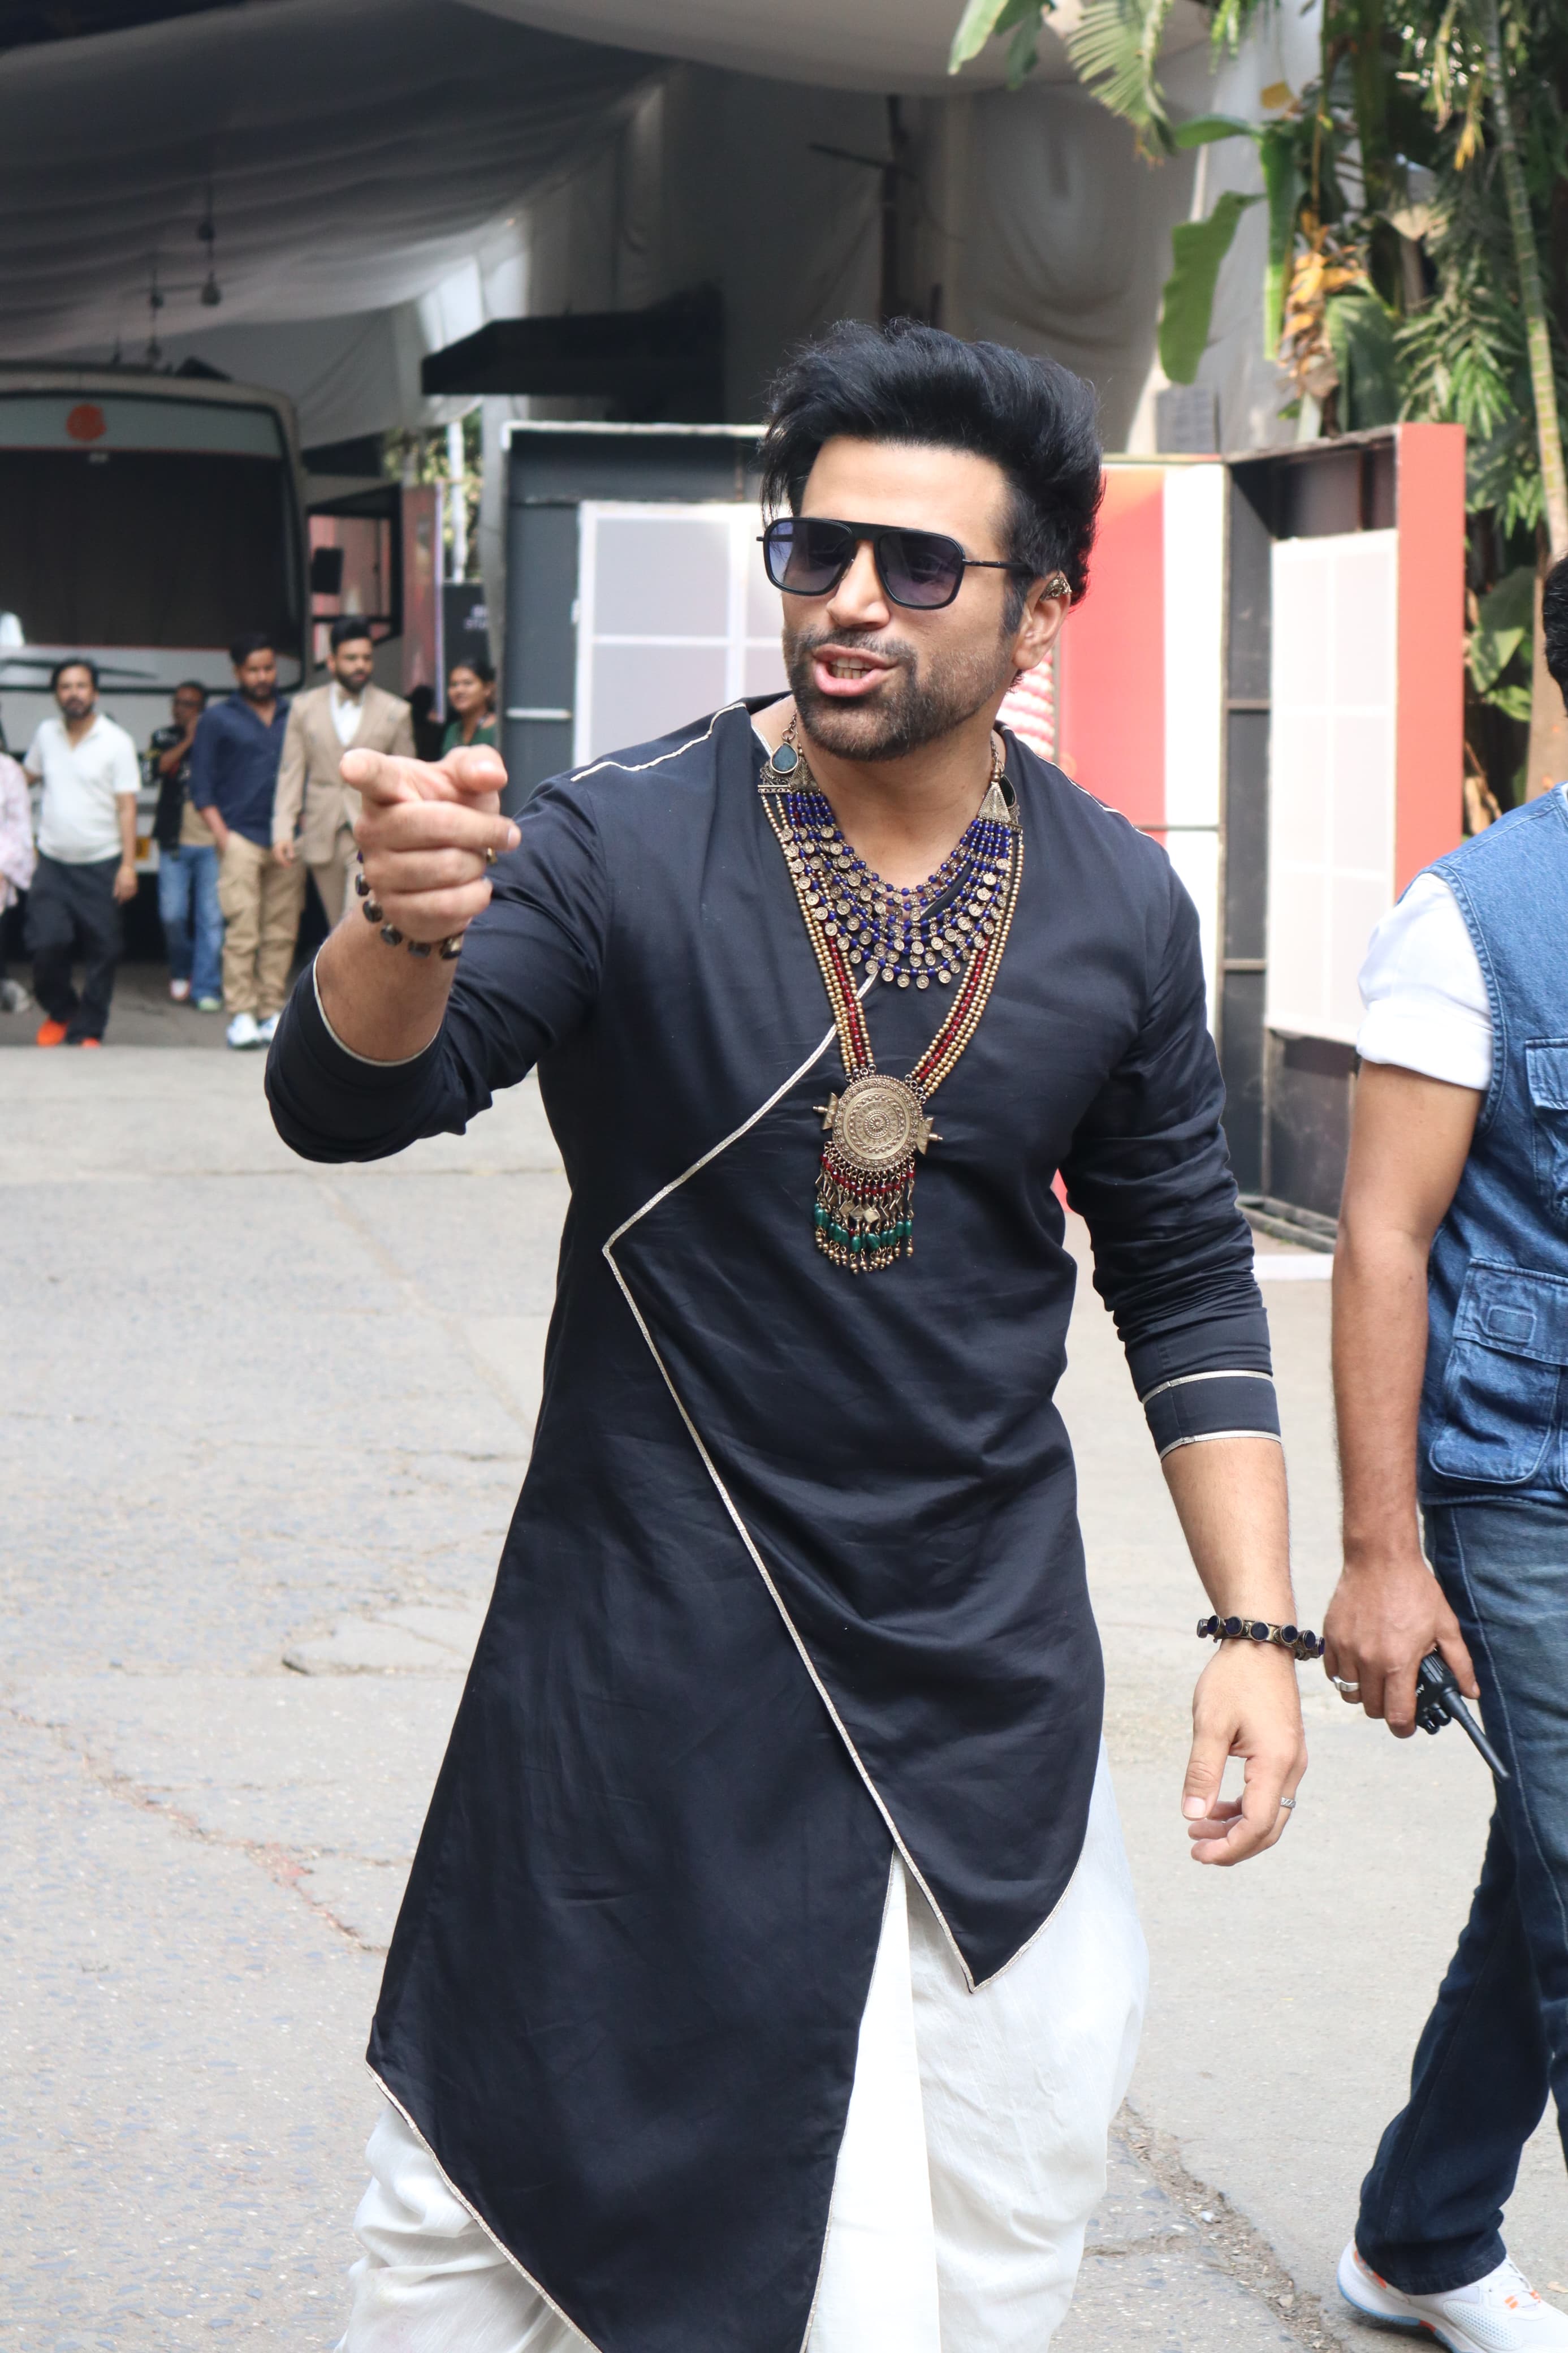 Rithvik Dhanjani opted for a black kurta with white dhoti as he was photographed in the city